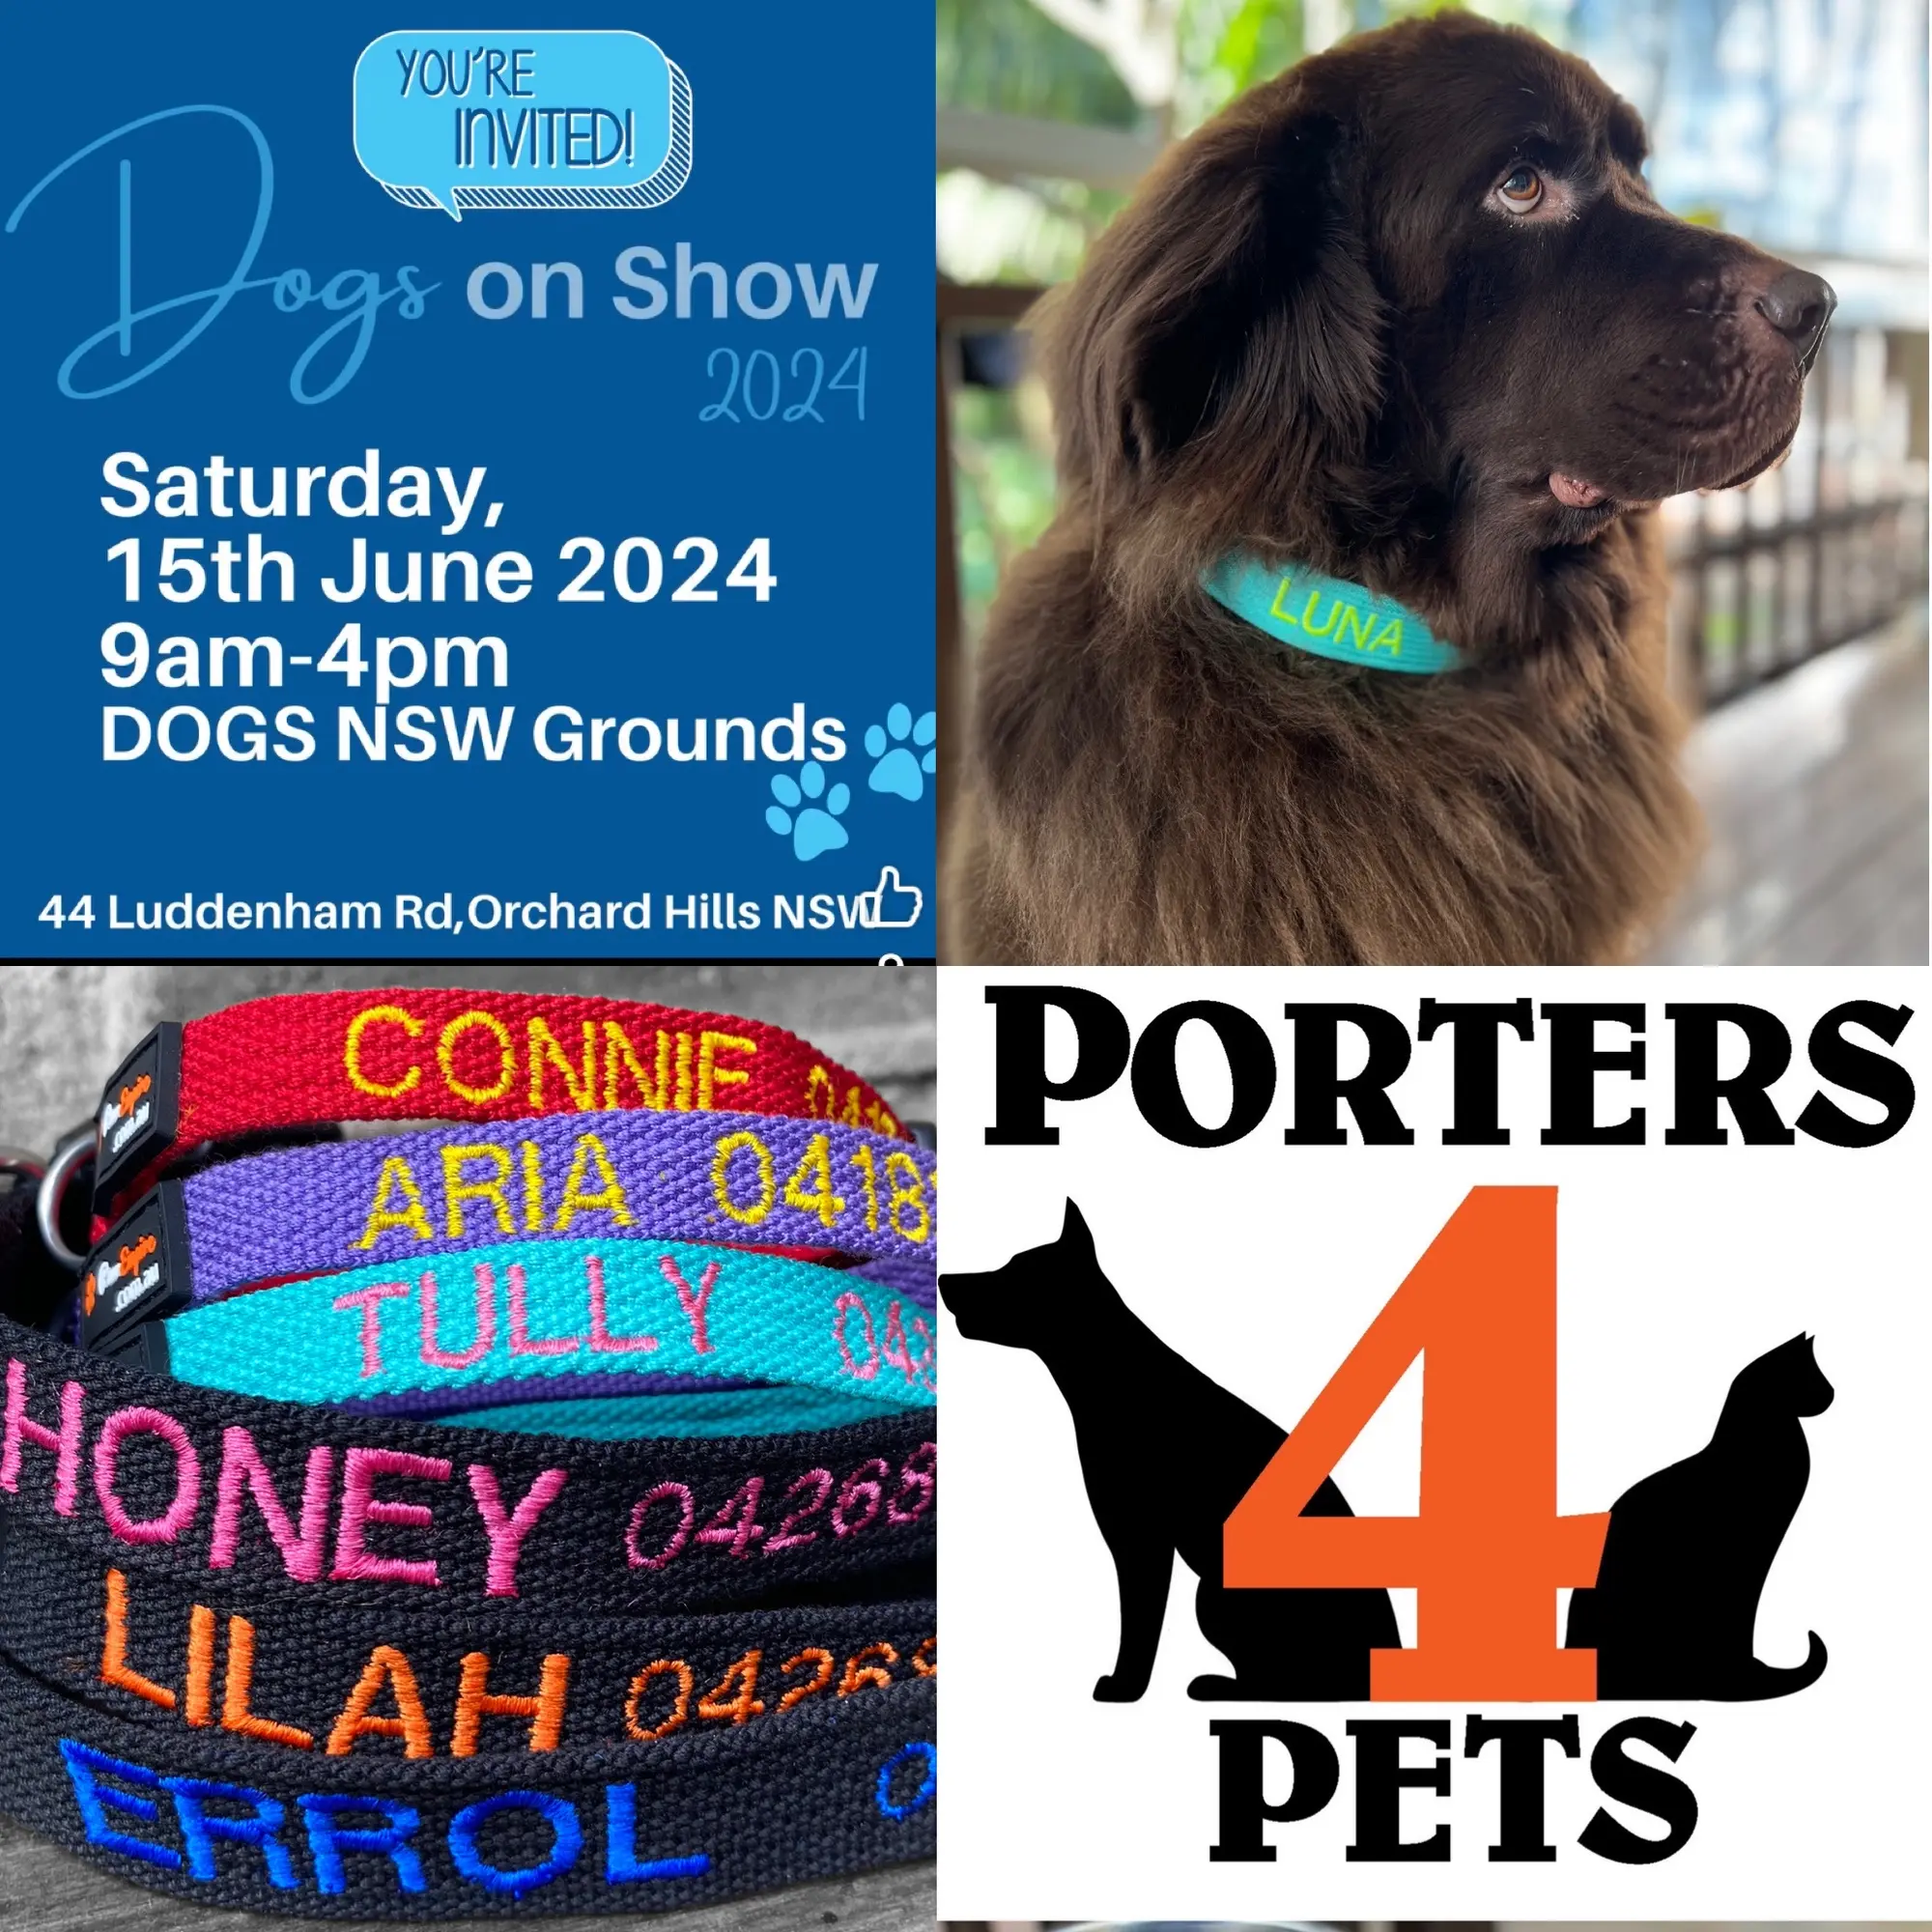 Dogs On Show - Saturday 15th June 2024